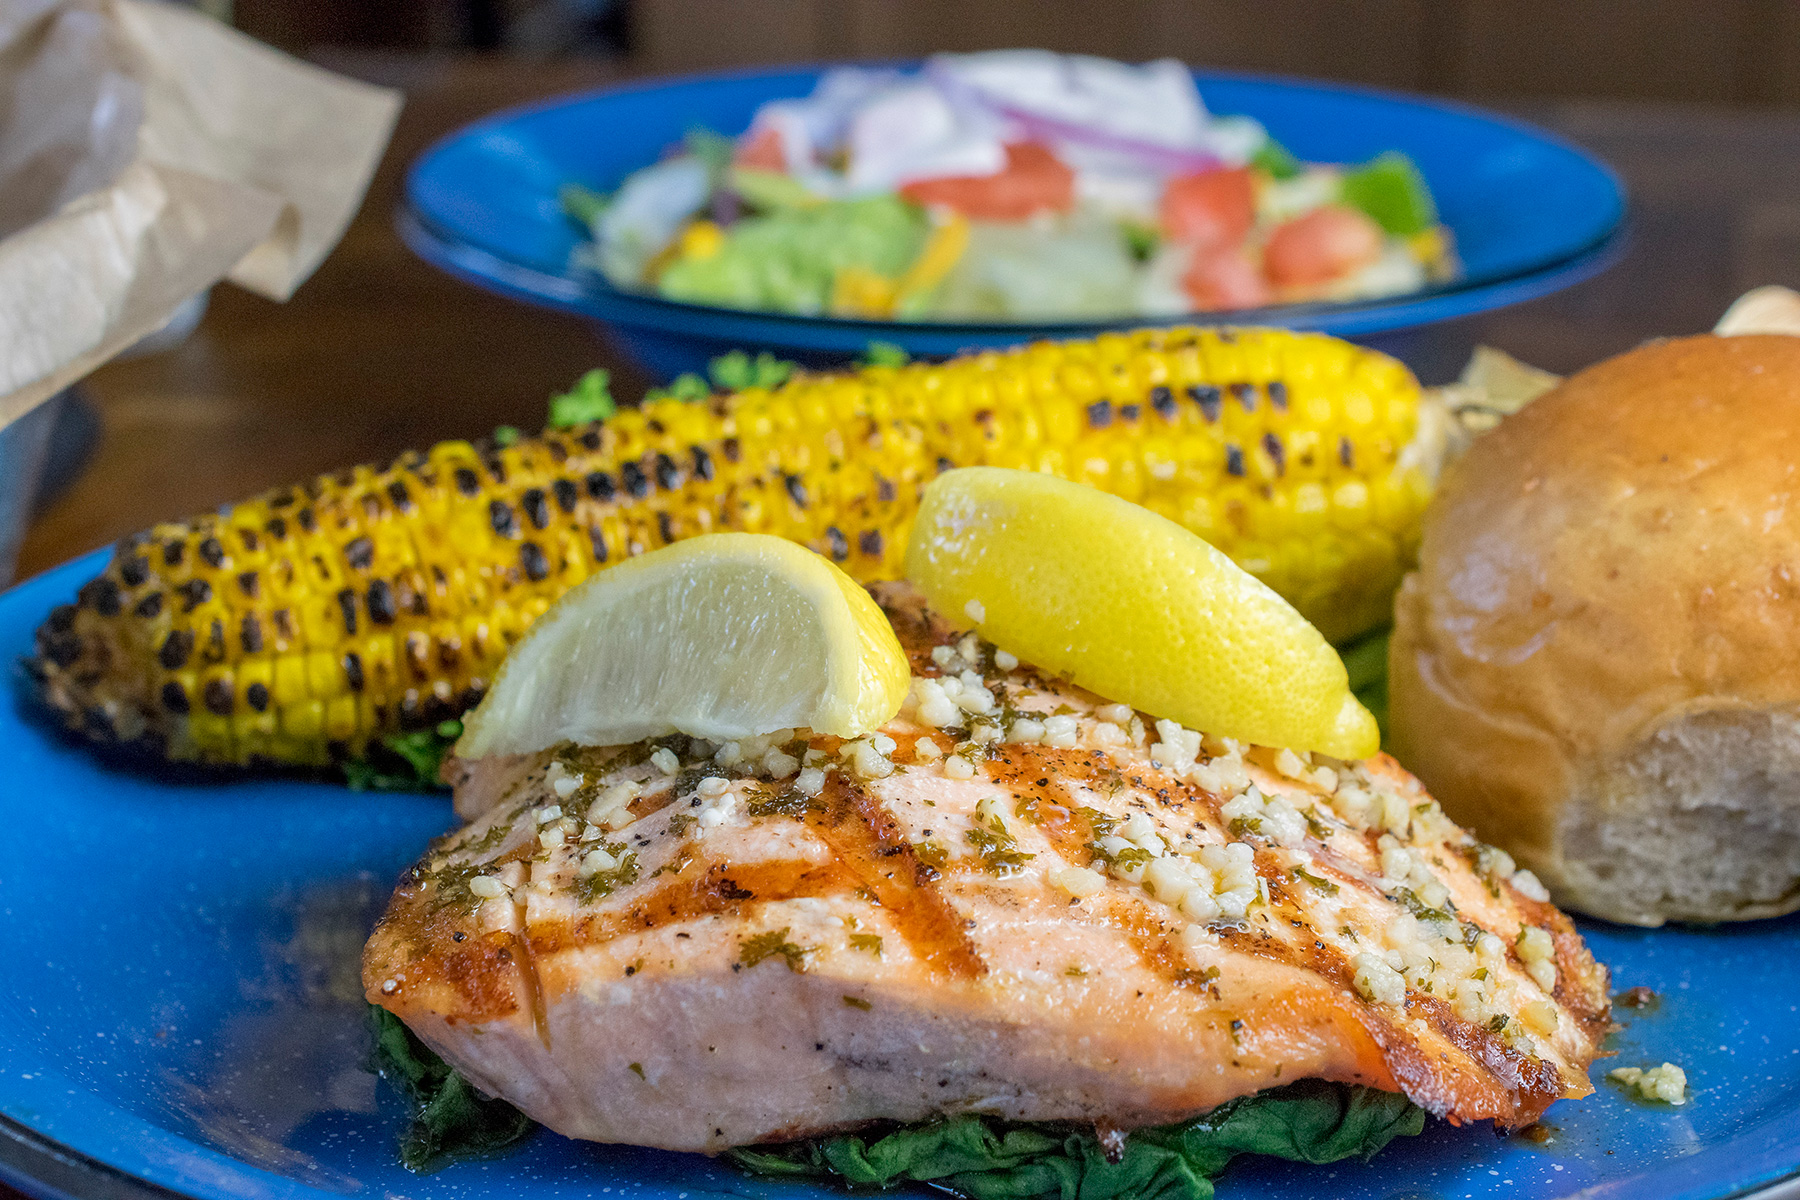 Hoffbrau Steak & Grill House’s grilled salmon is a healthy dinner option.